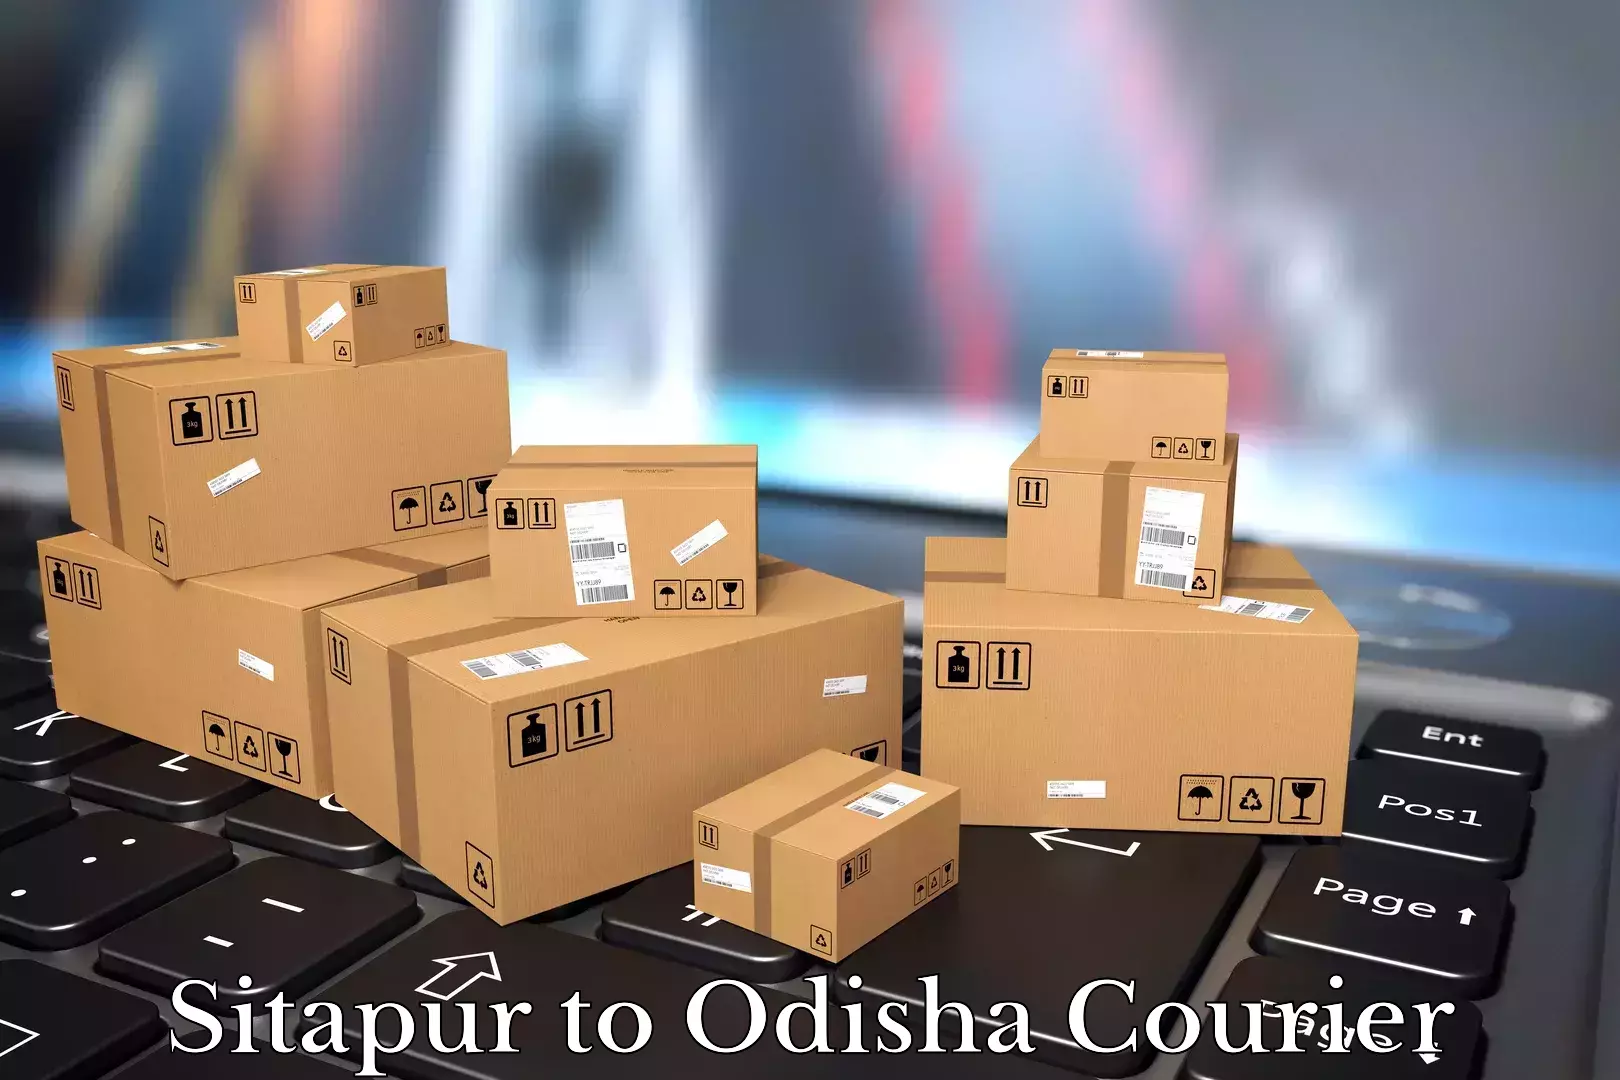 Moving and packing experts Sitapur to Odisha